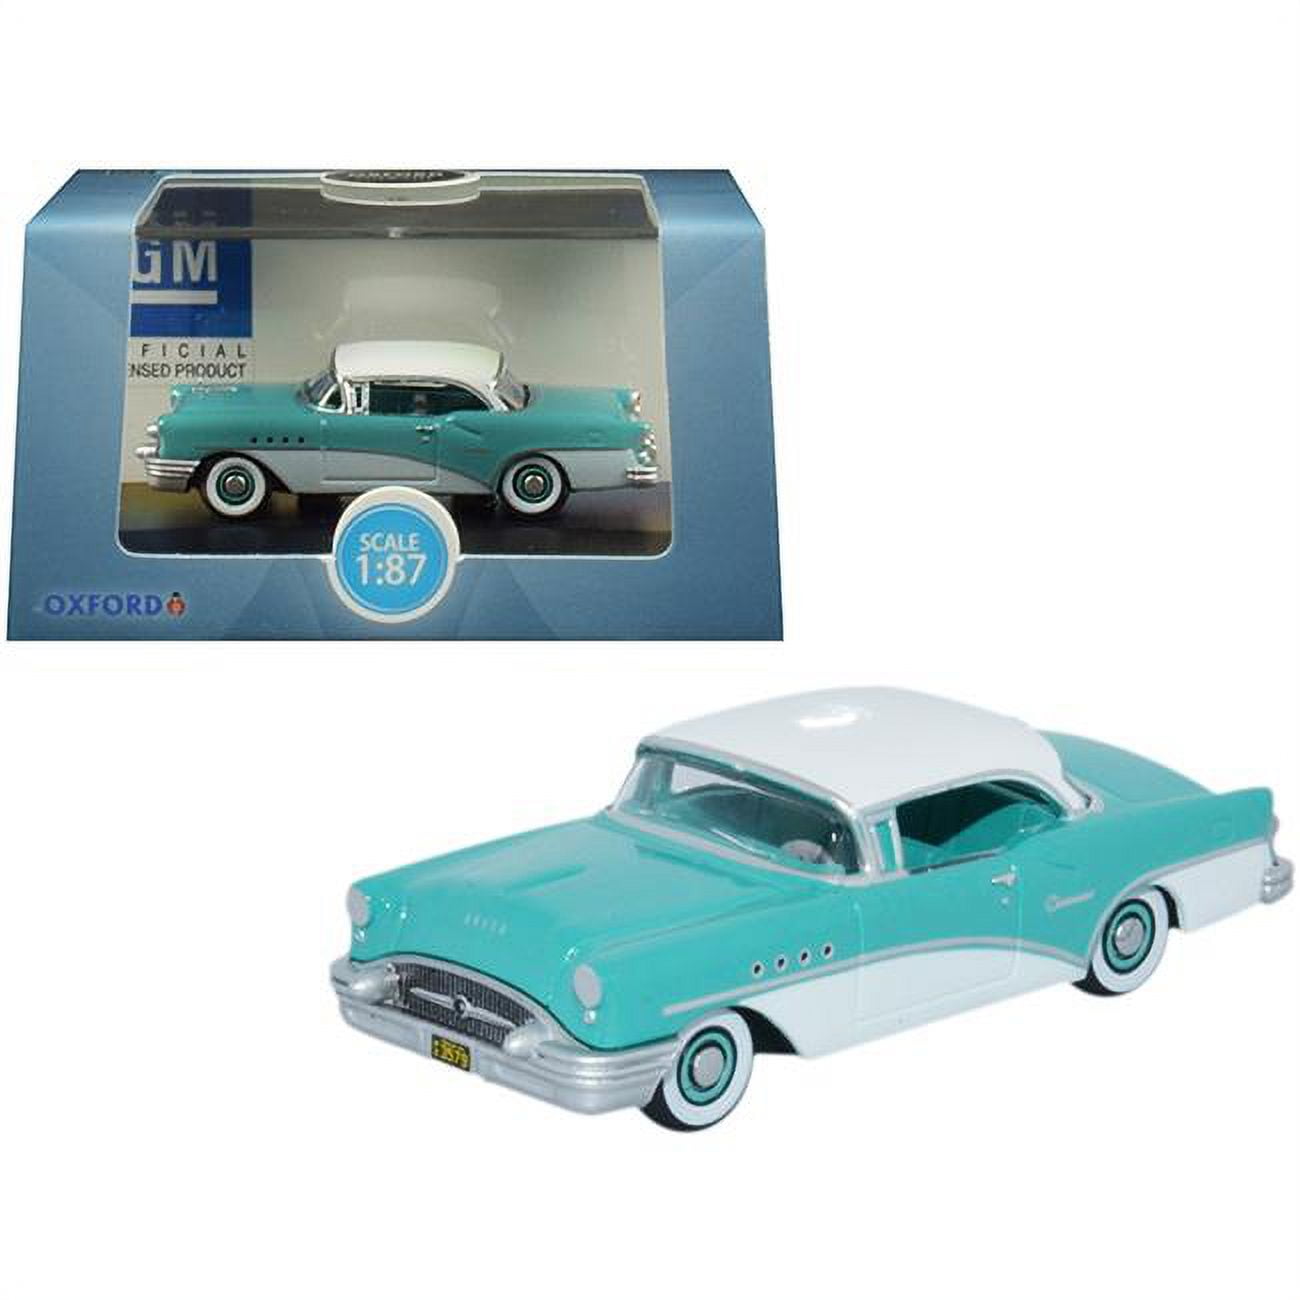 87bc55001 1955 Buick Century Turquoise & Polo White 1-87 Ho Scale Diecast Model Car